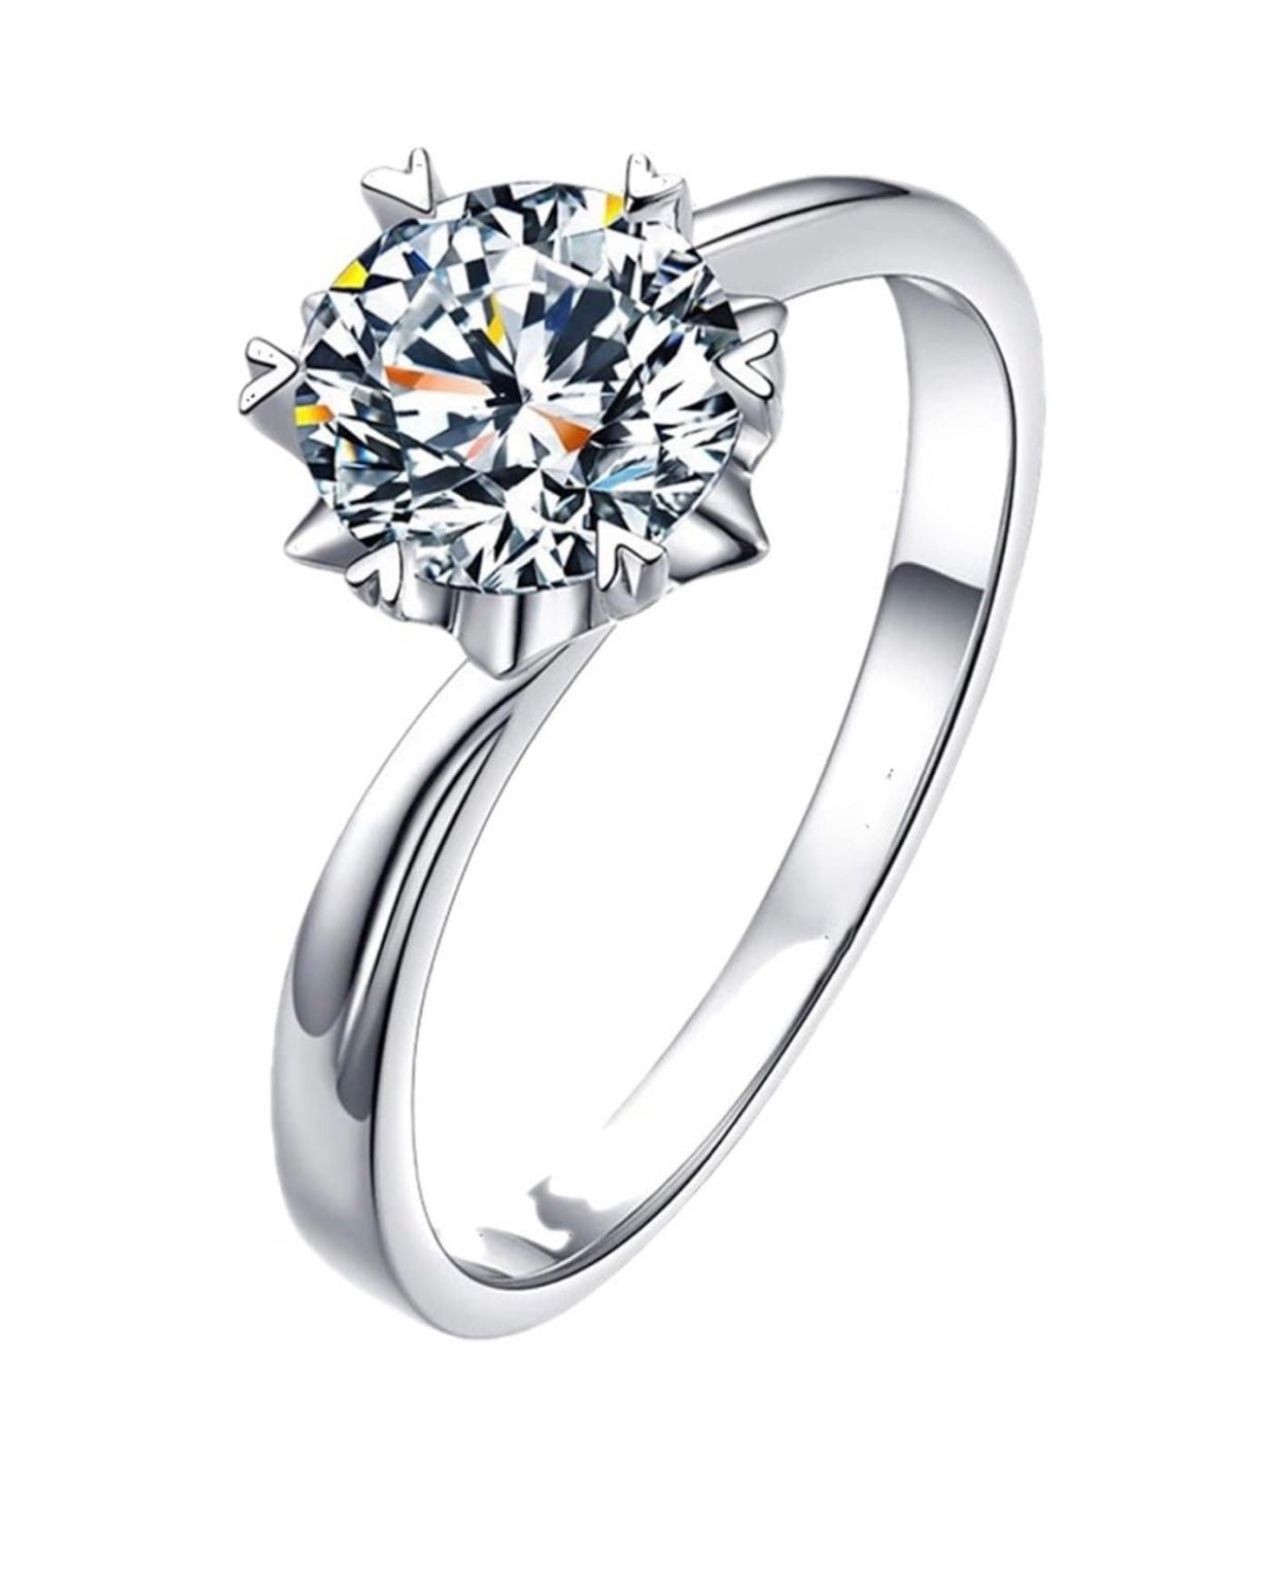 Woman’s Engagement Ring Size 10